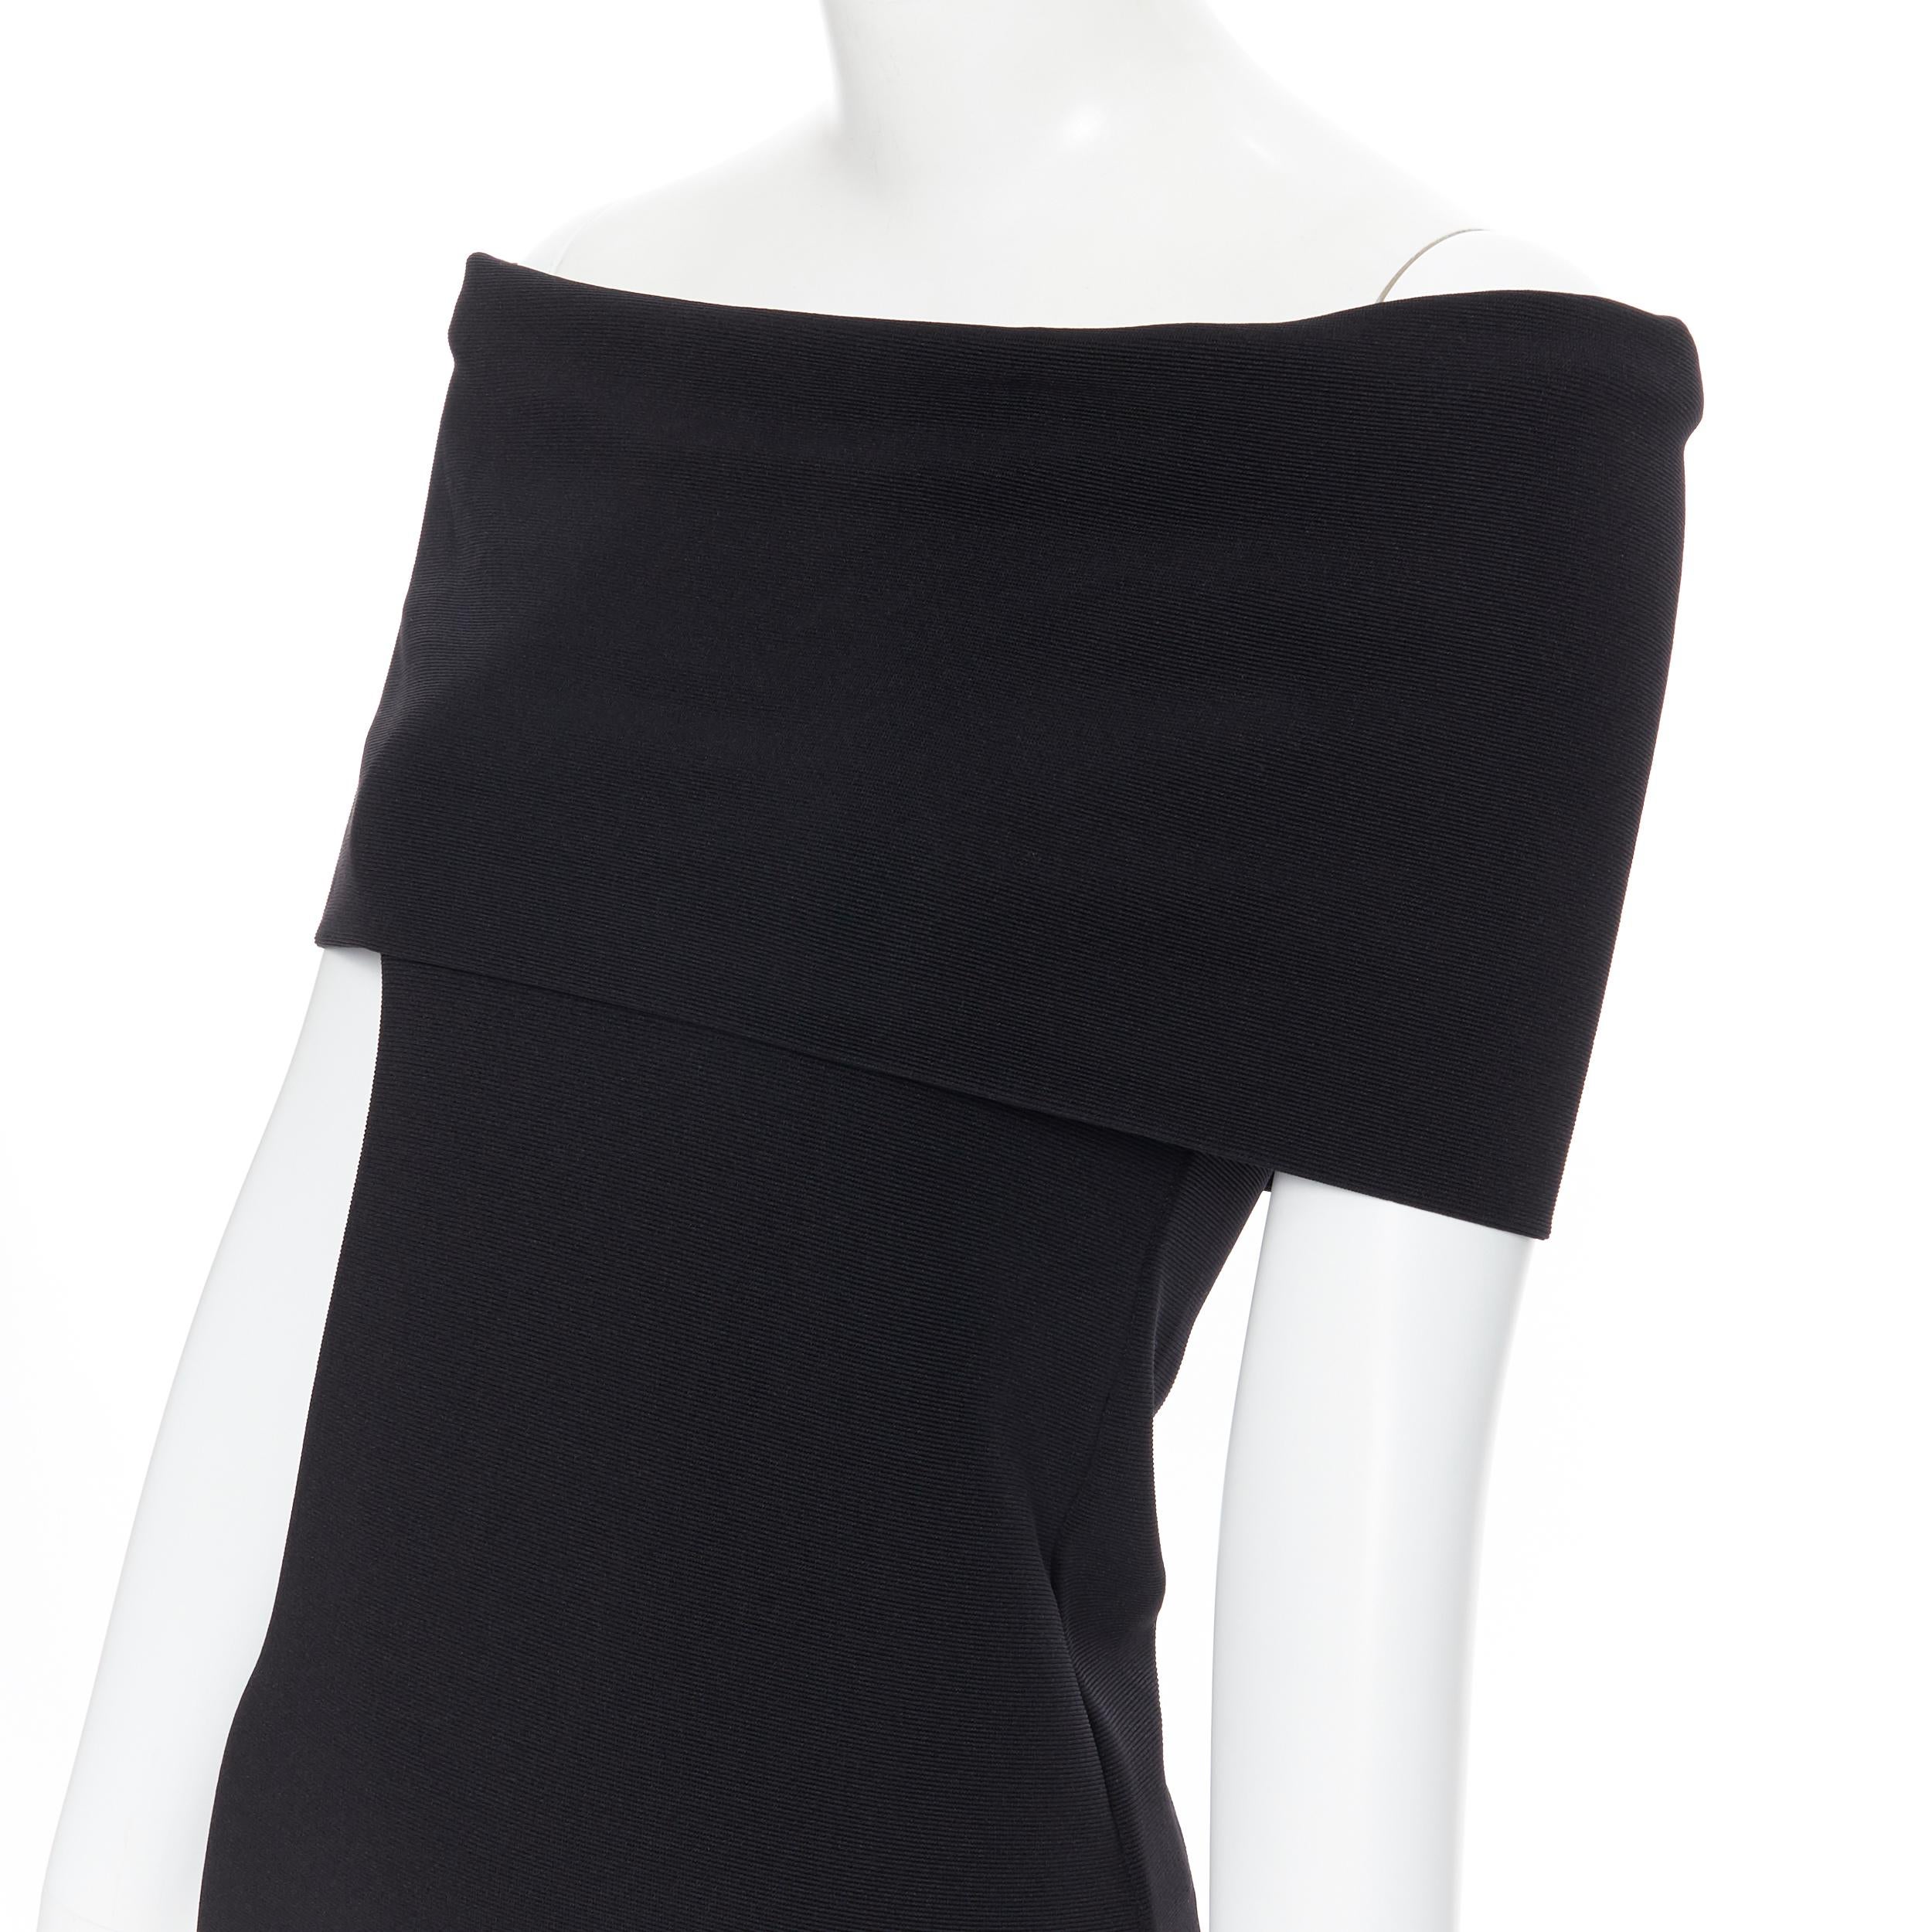 ROSETTA GETTY black knitted foldover banded off shoulder stretch top XS
Brand: Rosetta Getty
Designer: Rosetta Getty
Model Name / Style: Off shoulder top
Material: Nylon blend
Color: Black
Pattern: Solid
Extra Detail: Stretch fit. Off shoulder band.